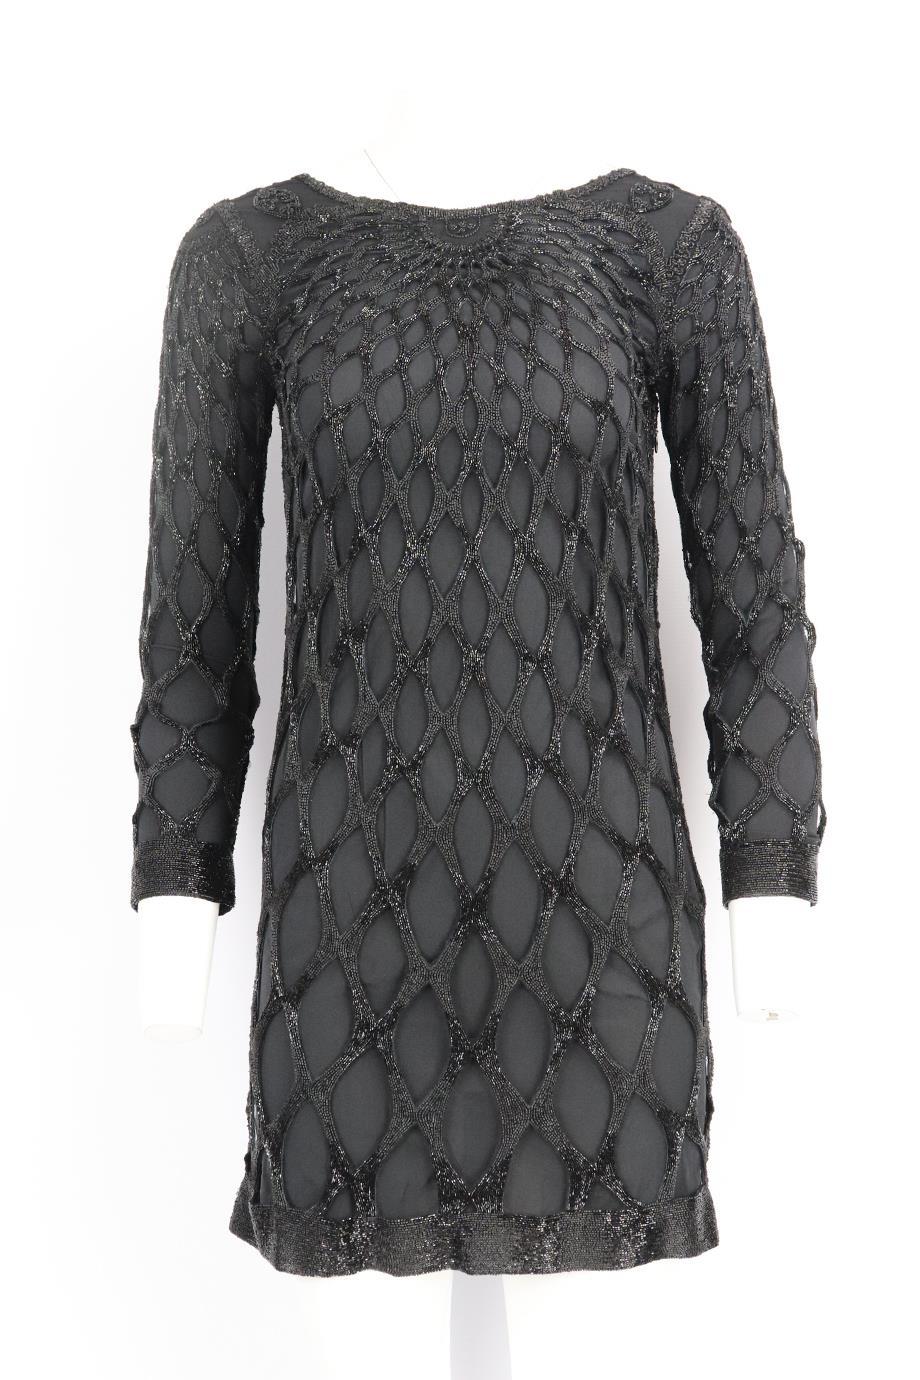 Emilio Pucci open back bead embellished silk mini dress. Black. Long sleeve, crewneck. Zip fastening at side. 100% Polyamide; lining: 91% silk, 9% elastane. Size: IT 40 (UK 8, US 4, FR 36). Bust: 33 in. Waist: 31 in. Hips: 36 in. Length: 33.5 in.